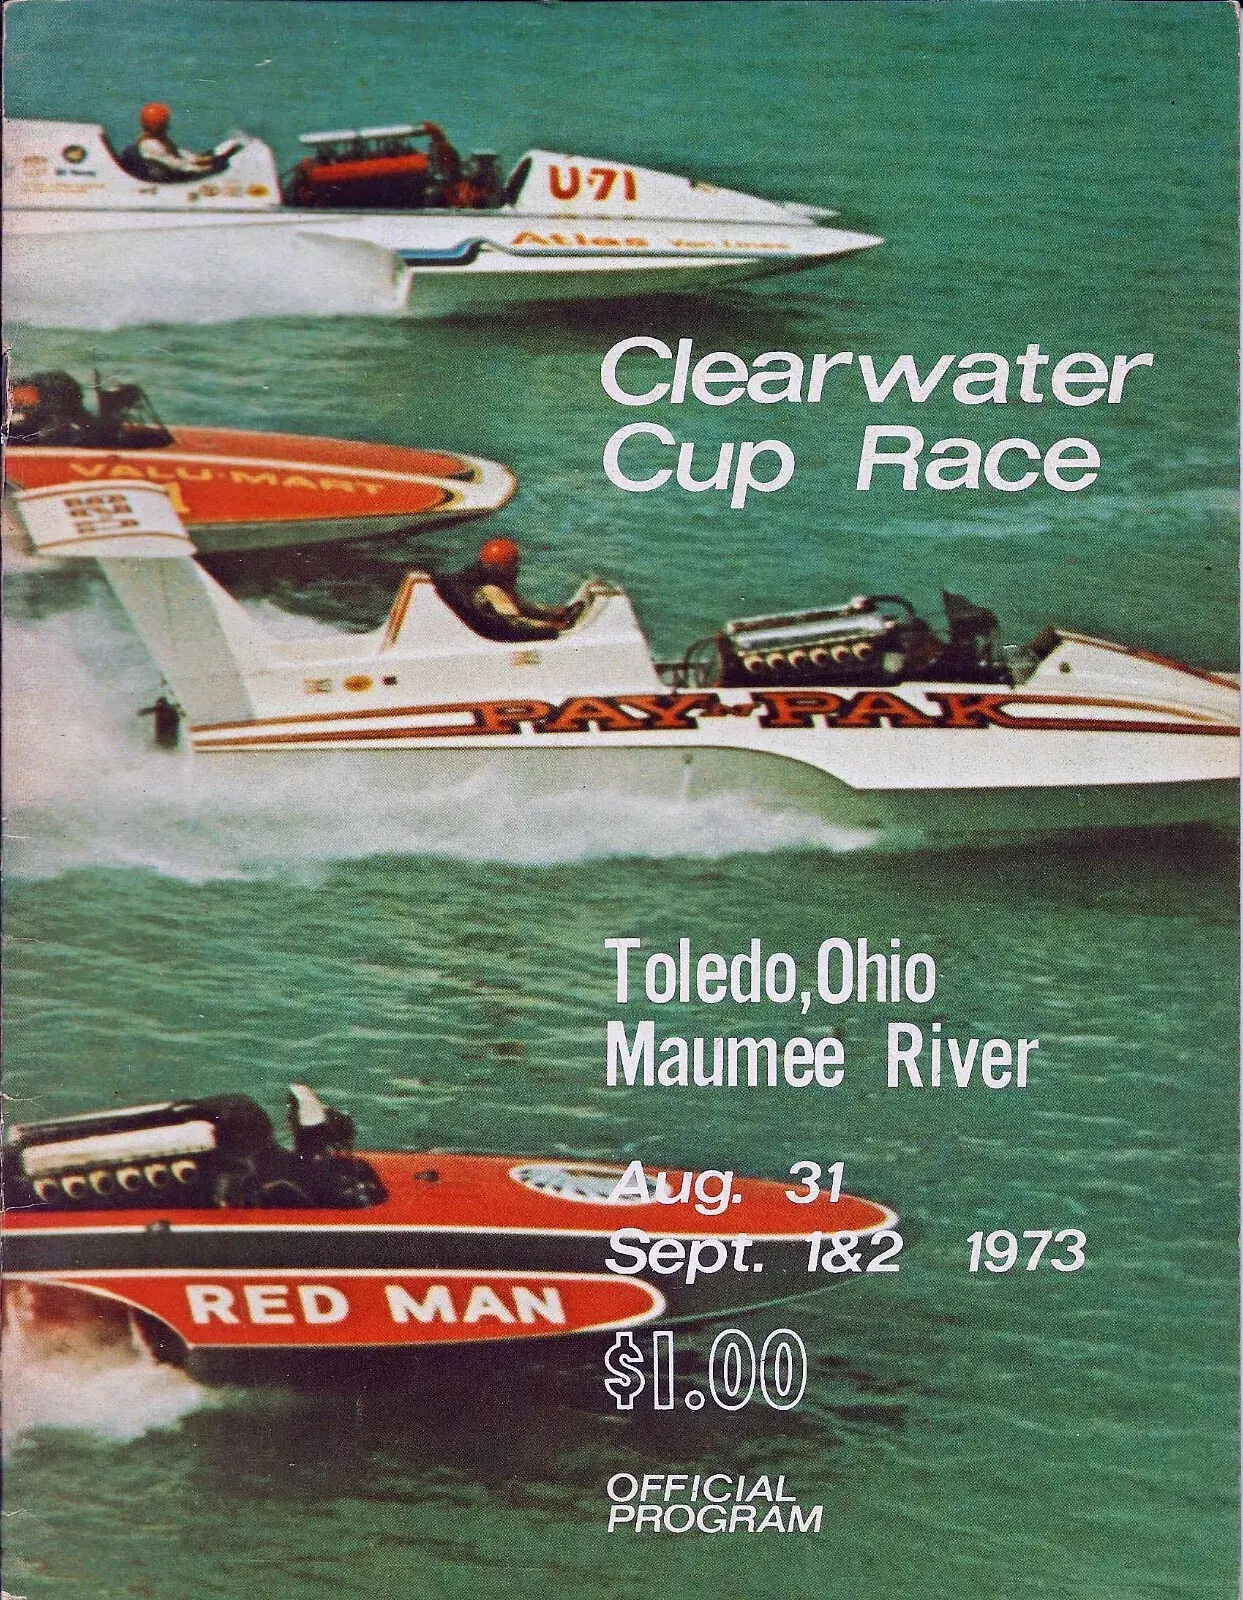 Hydroplane Racing Program: 1973 Clearwater Cup Race